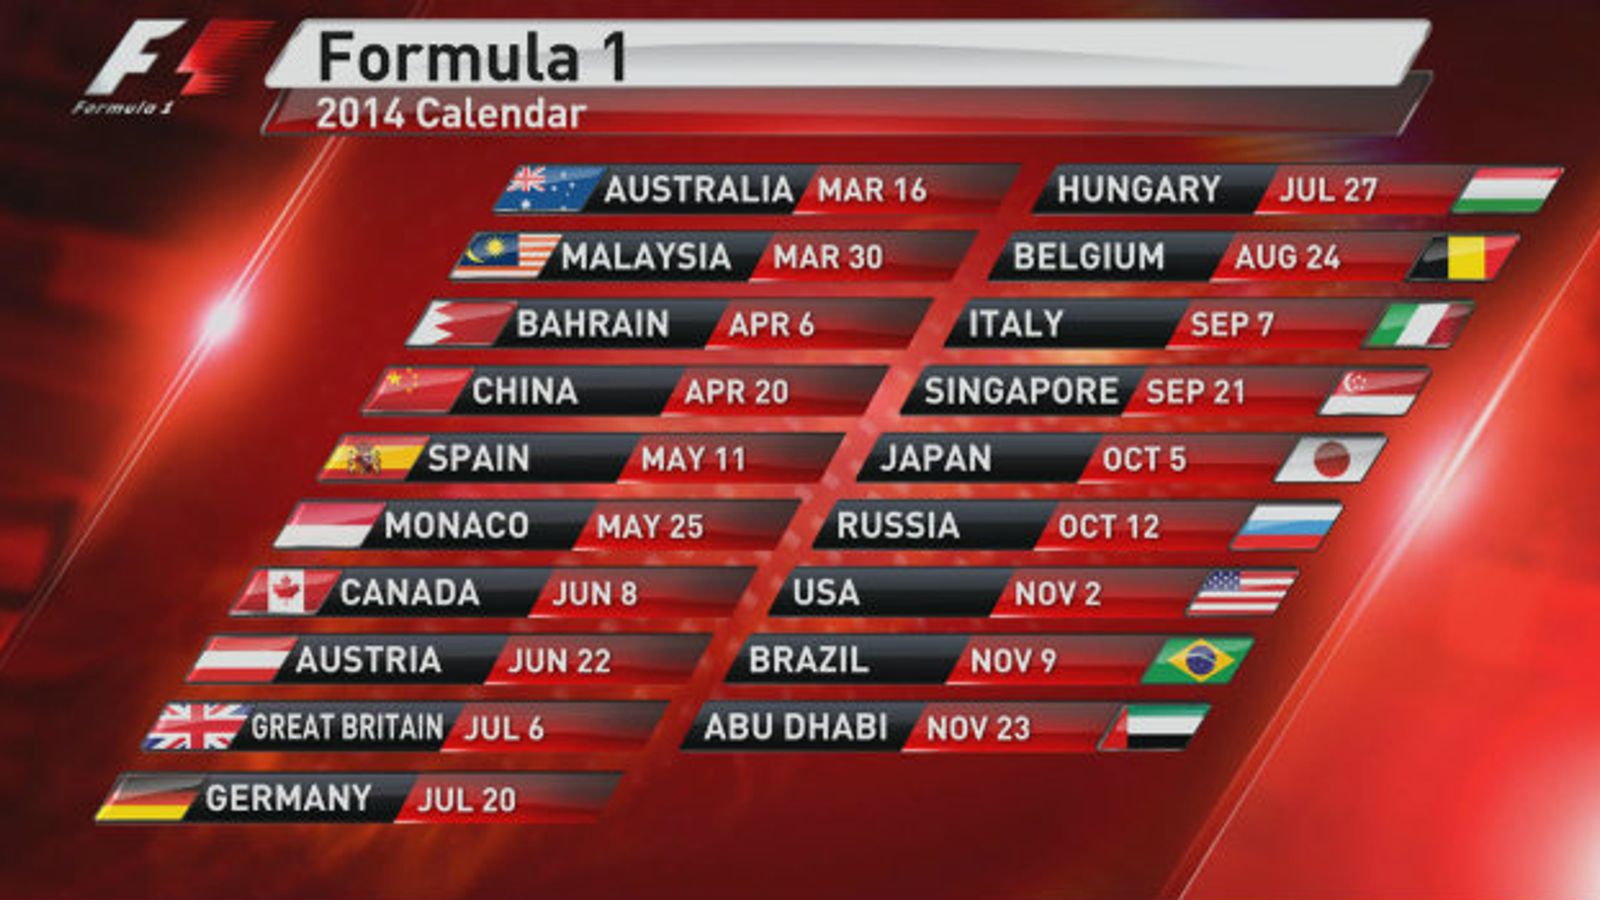 F1 in 2014 The driver lineups, car launches and test & race schedules